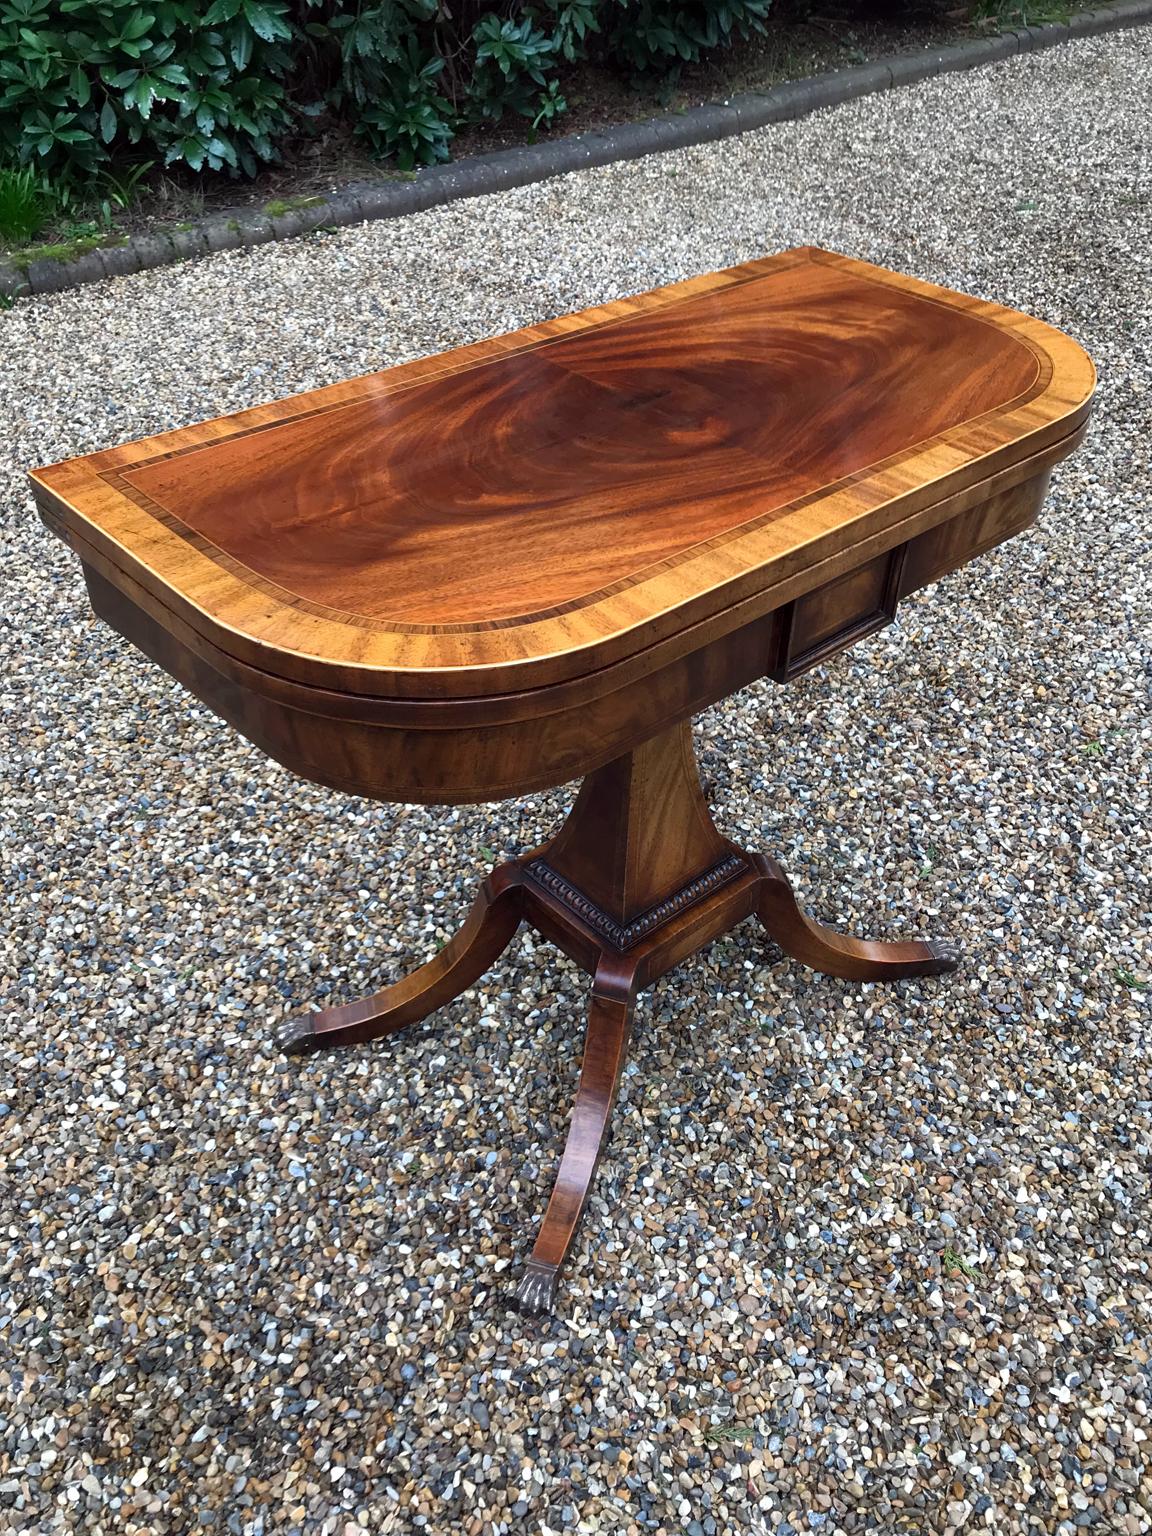 British 19th Century Regency Mahogany Inlaid Crossbanded Card Table with Splayed Legs